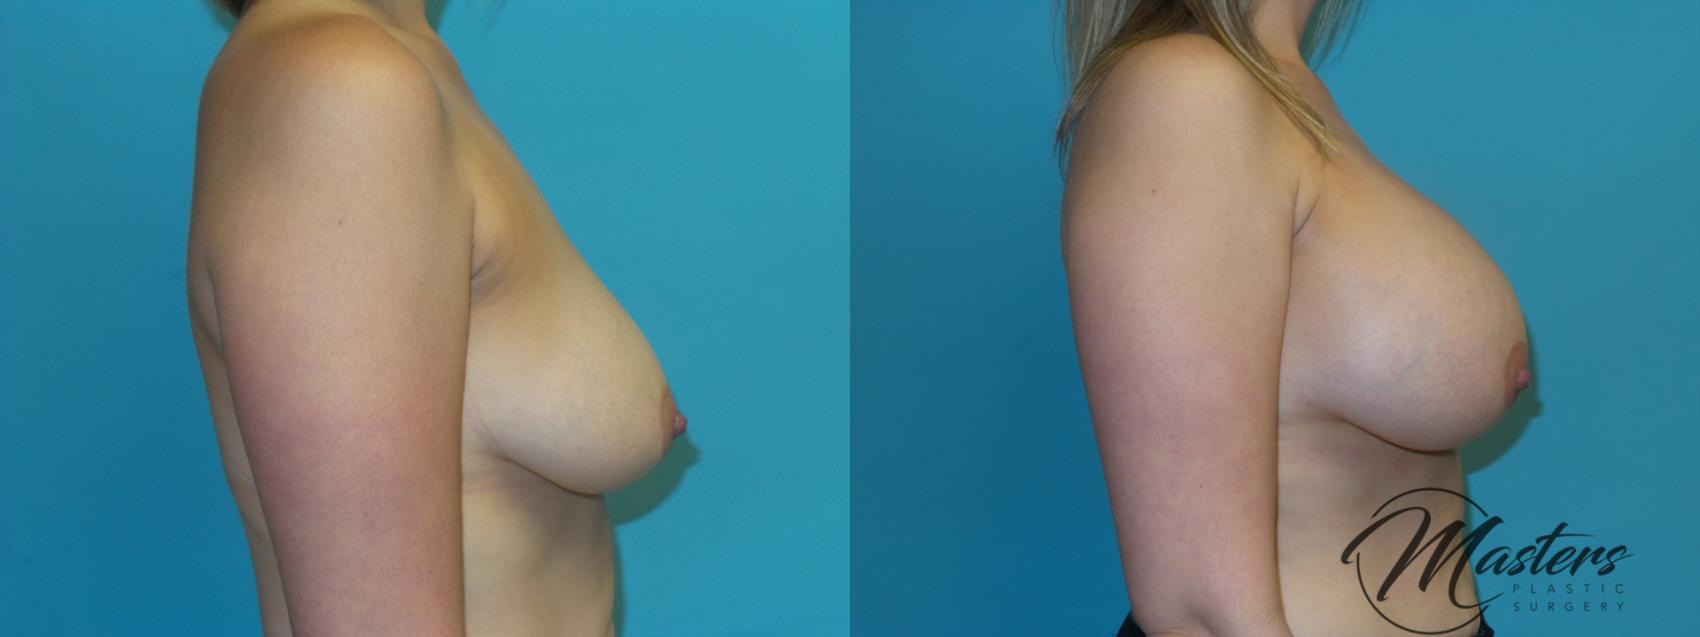 Before & After Breast Augmentation Case 6 Right Side View in Oklahoma City, Tulsa, Norman, OK